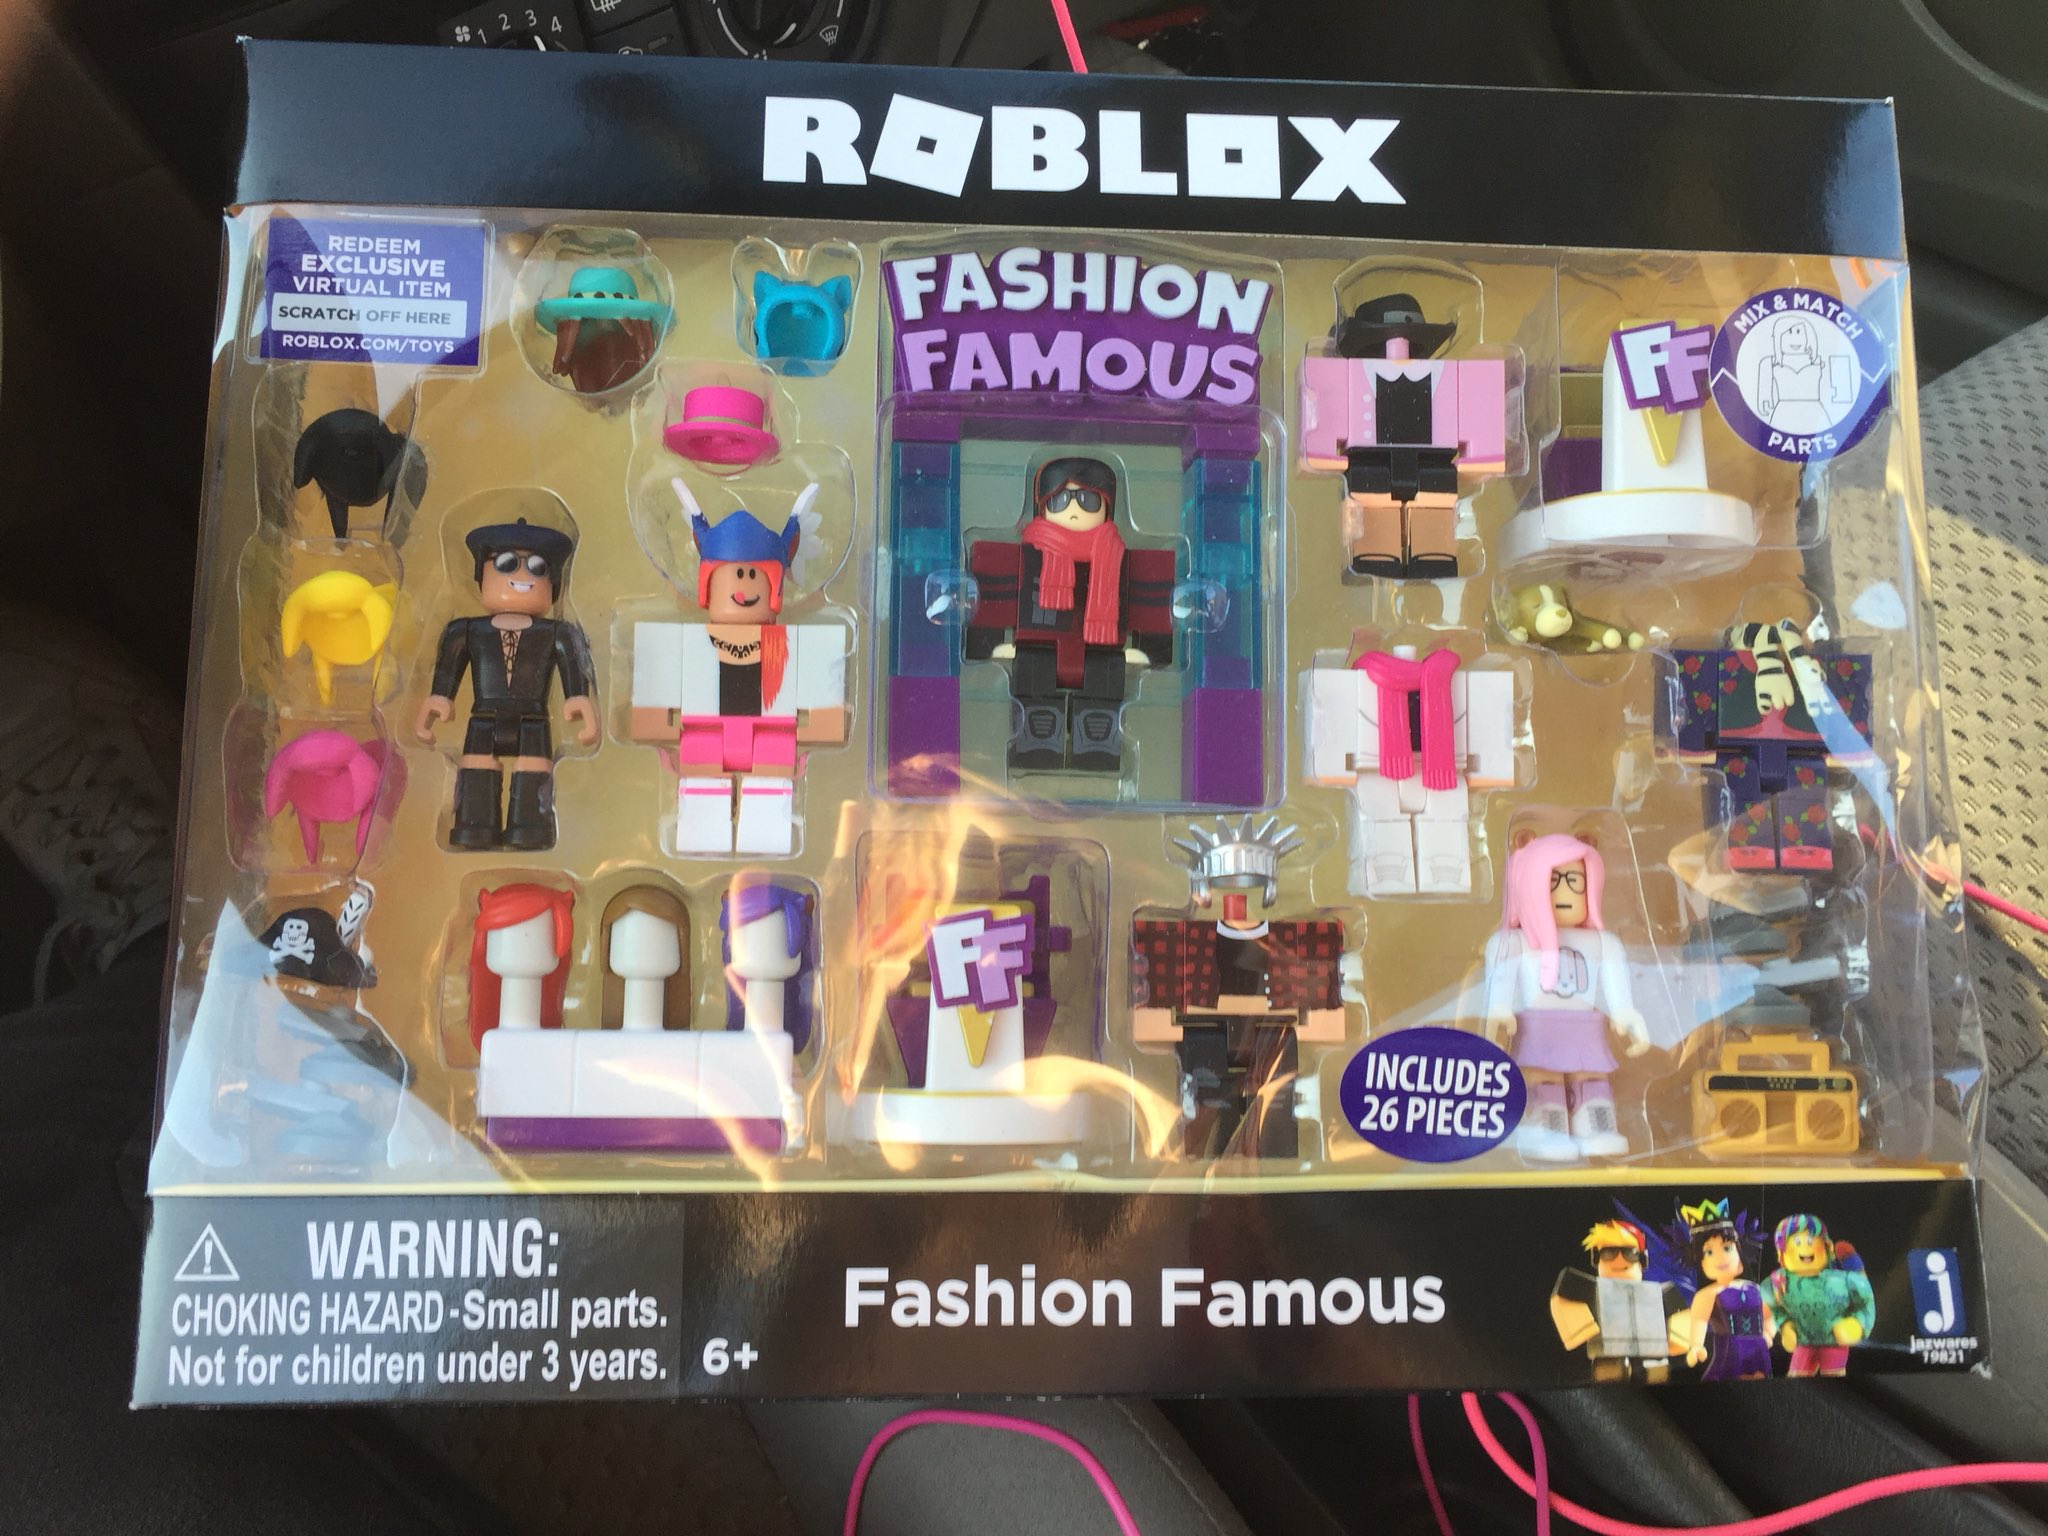 Bonnabellerose On Twitter Still On The Hunt For My Toy The Store Associate Didn T Understand What I Meant By Asking Them If They Had The Next Series Of Roblox Blind Boxes - roblox fashion famous toy